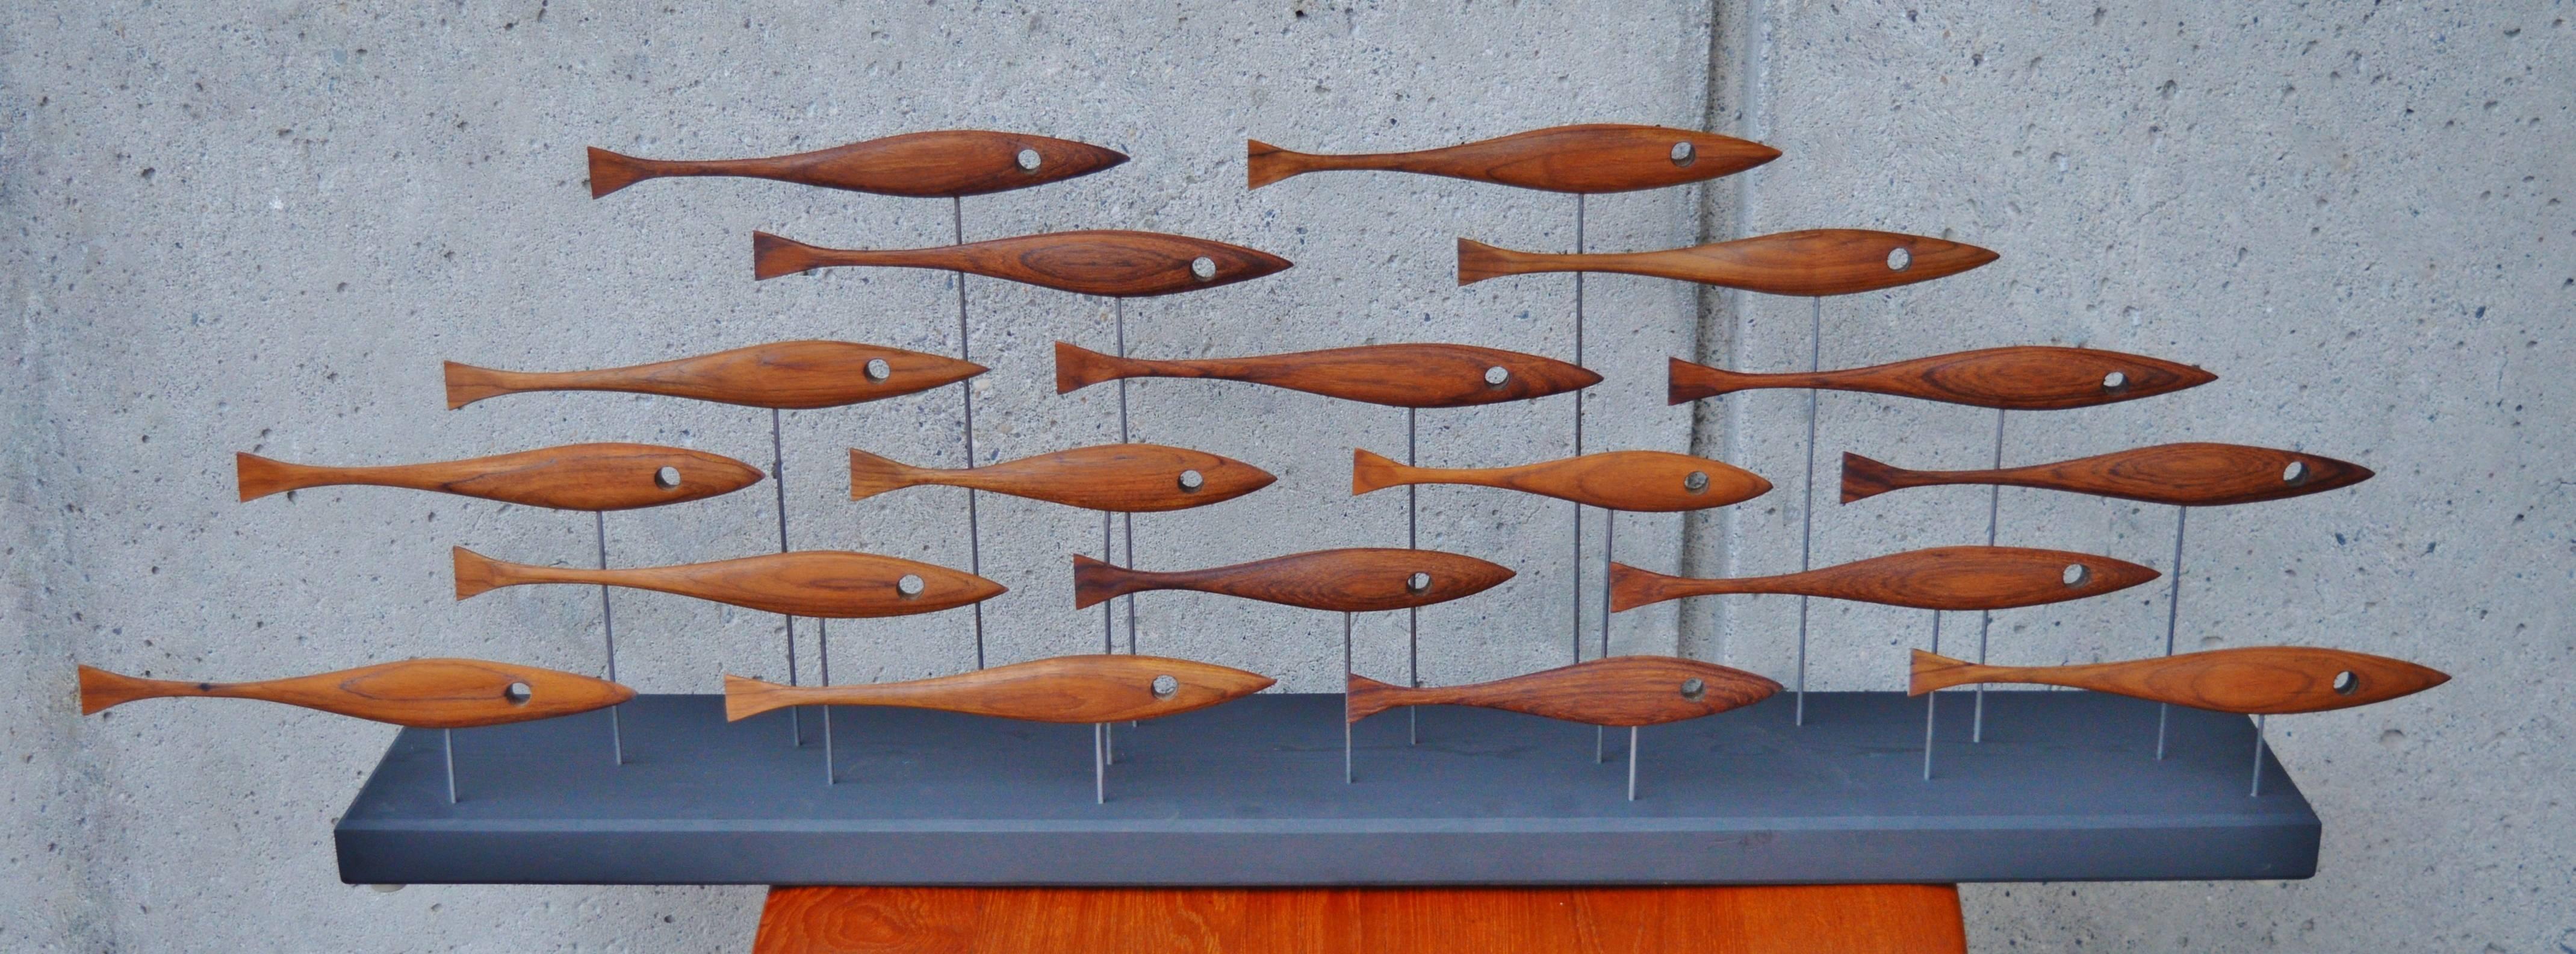 Vancouver BC artist, Tyler Fritz has always had a love of Danish Modern and walnut Mid-Century furniture. Coming across pieces that have been destroyed beyond being restored, he decided to salvage and carve the hardwood remnants into delightful